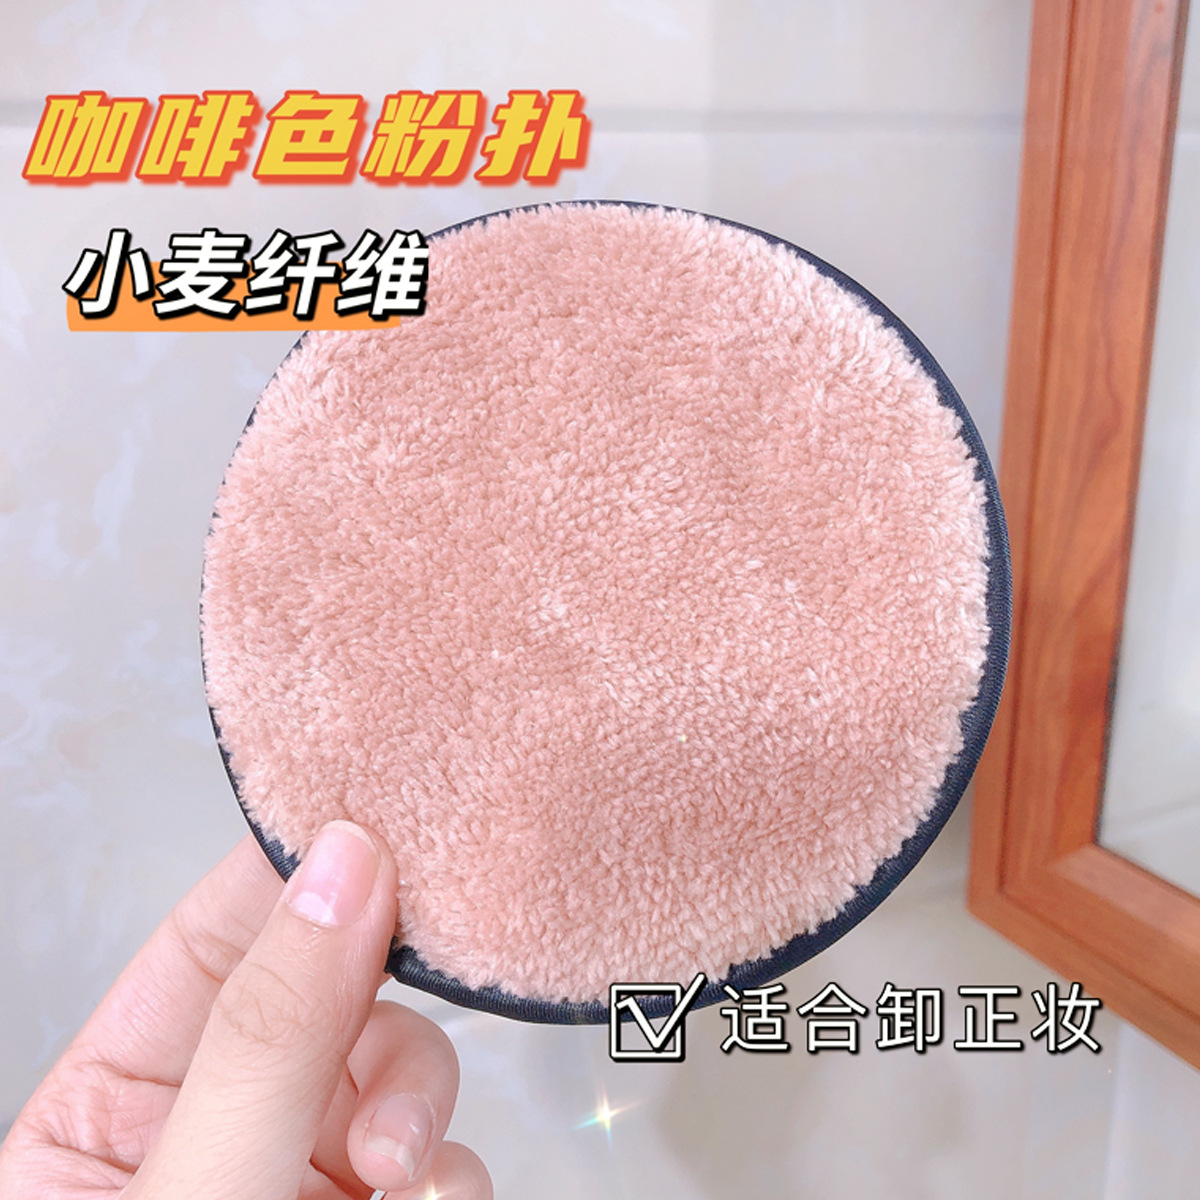 Beauty Tools Lazy Water Makeup Removing Powder Puff Fiber Facial Cleaning Puff Facial Wipe Recyclable Double-Sided Cleaning Sponge